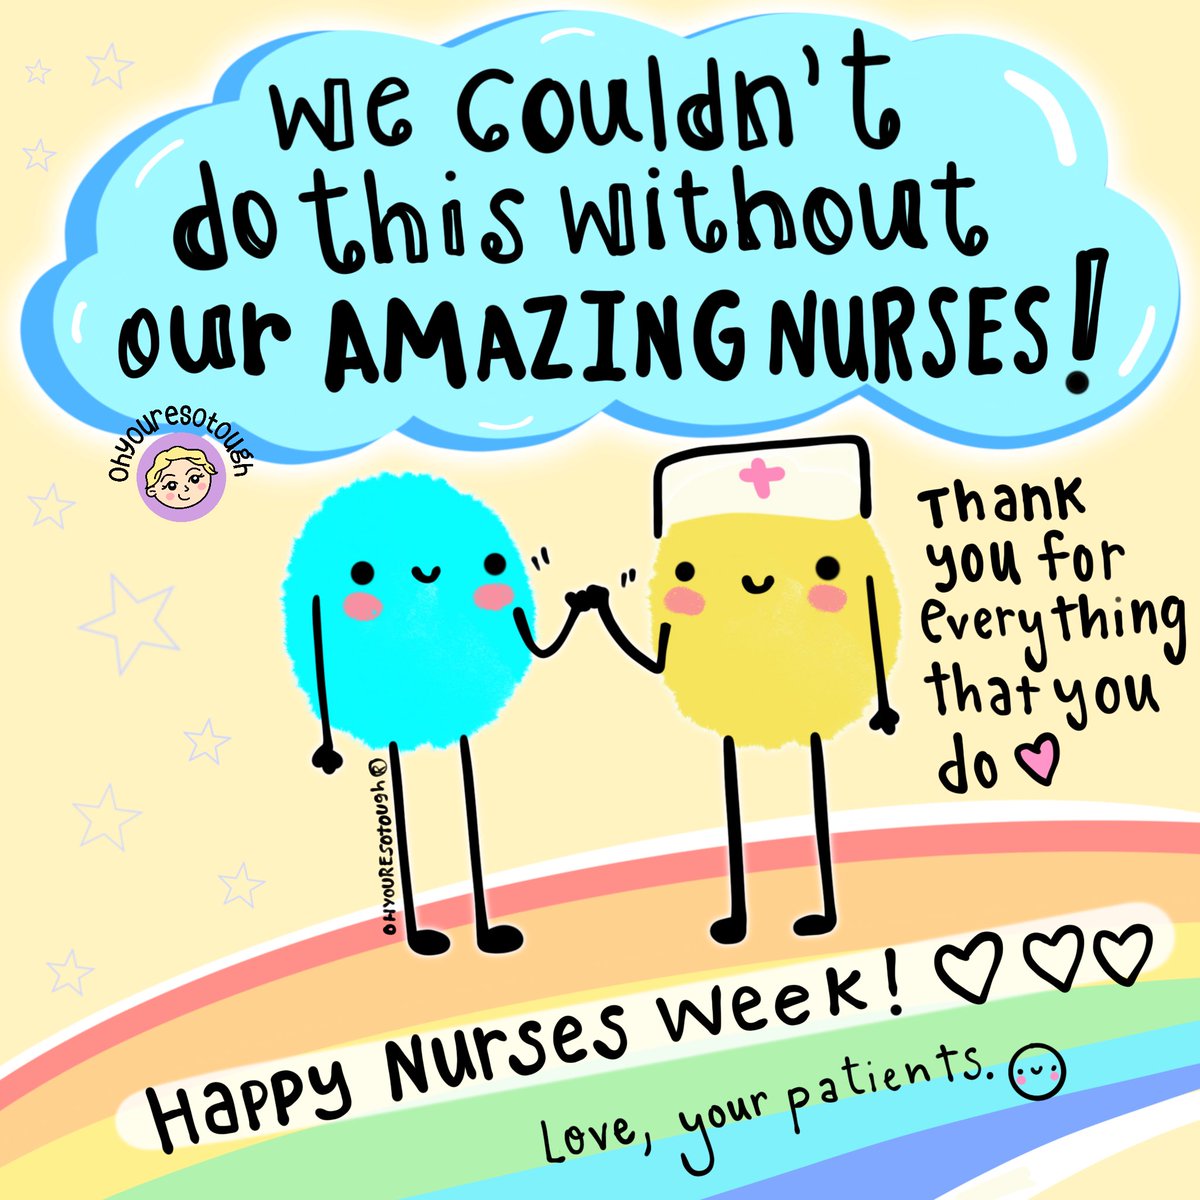 Thank you to all the amazing nurses out there. You truly make a difference in us getting through this. 🥹❤️ Happy Nurses Week!